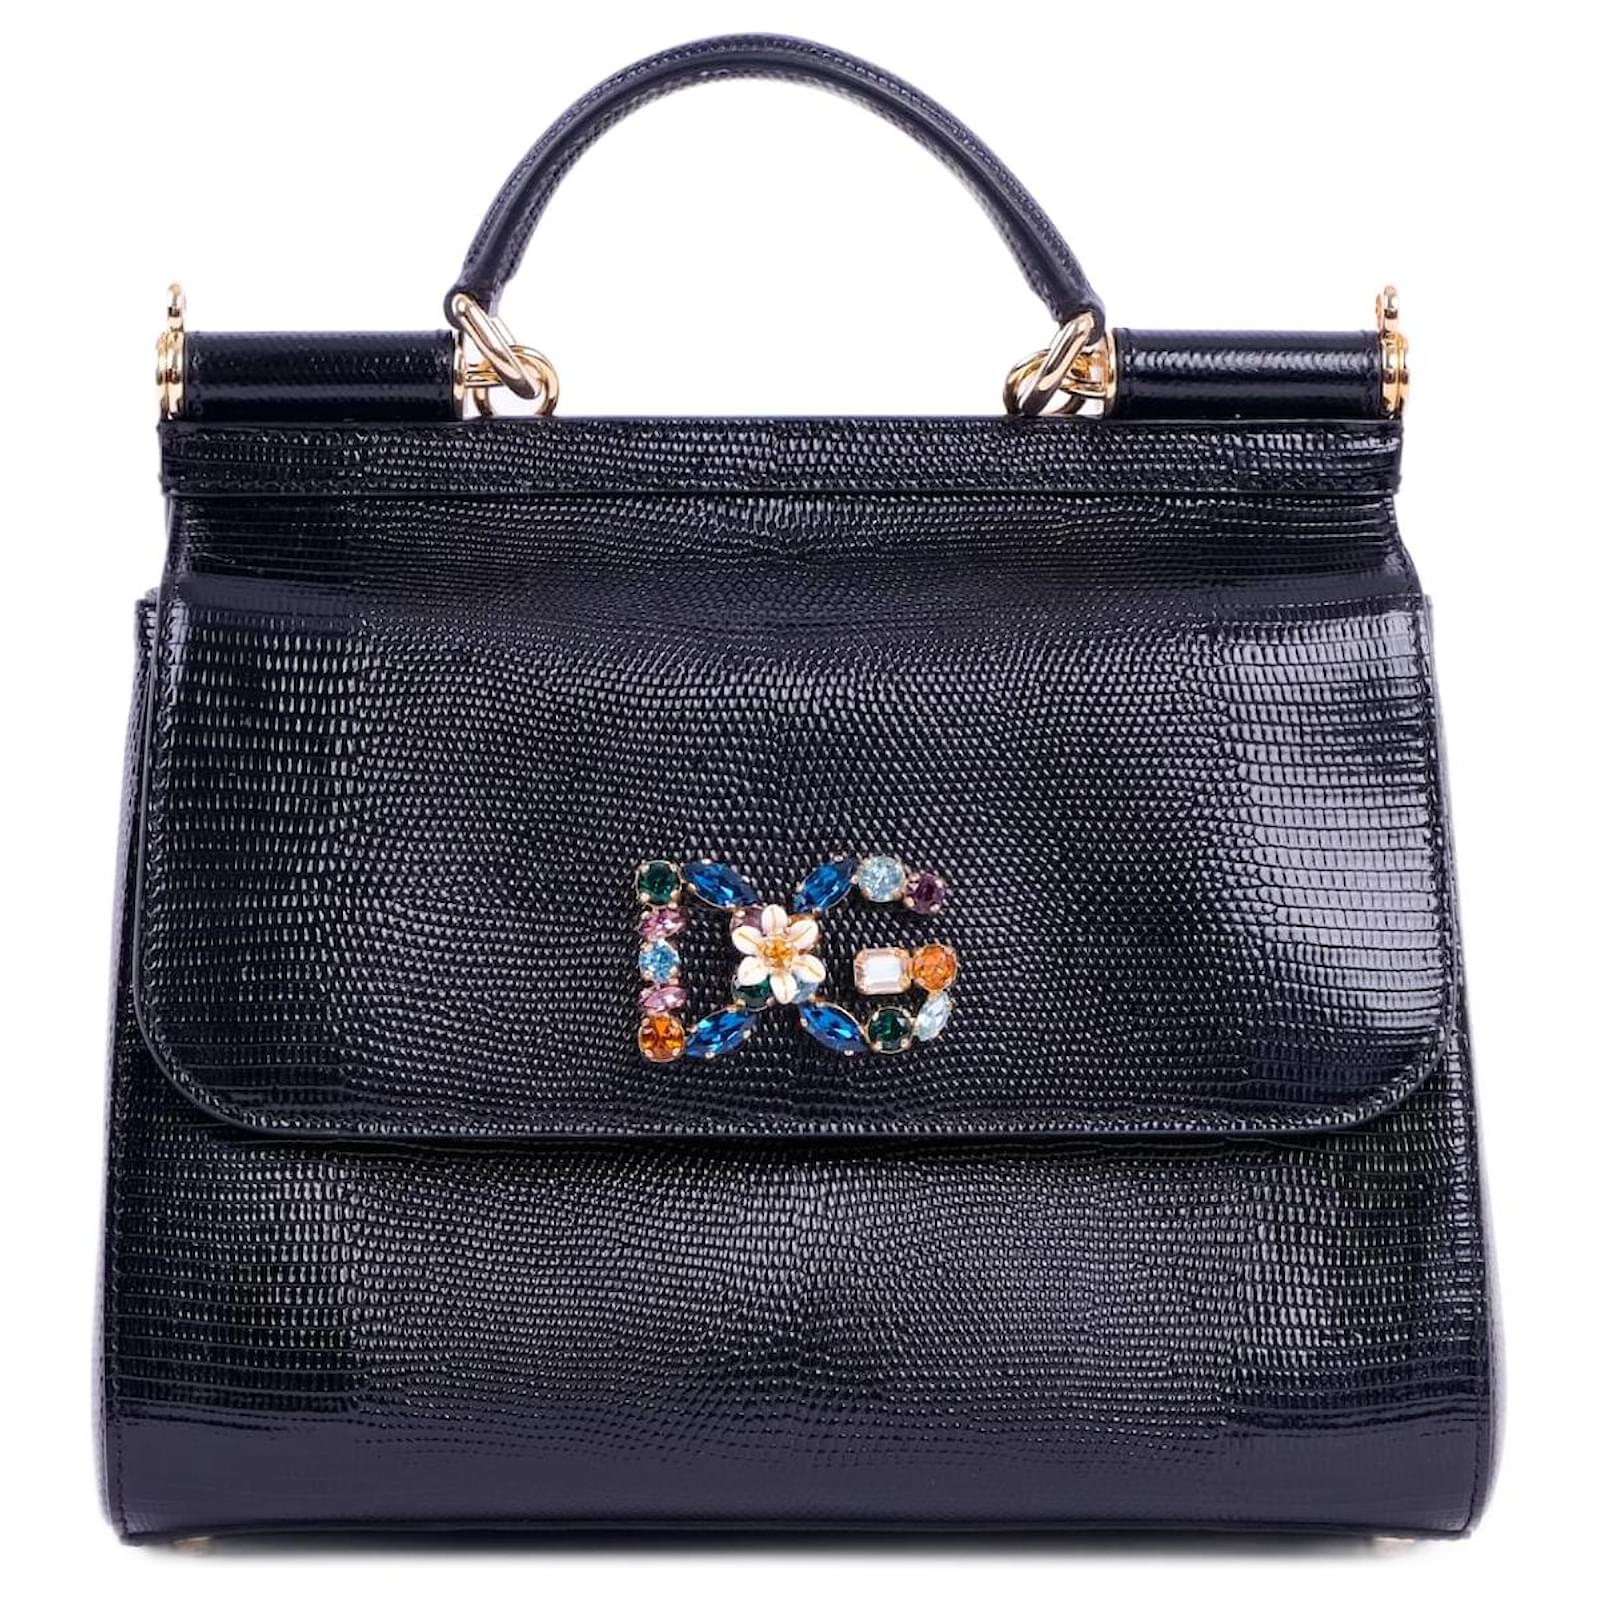 DOLCE & GABBANA Bags — choose from 77 items